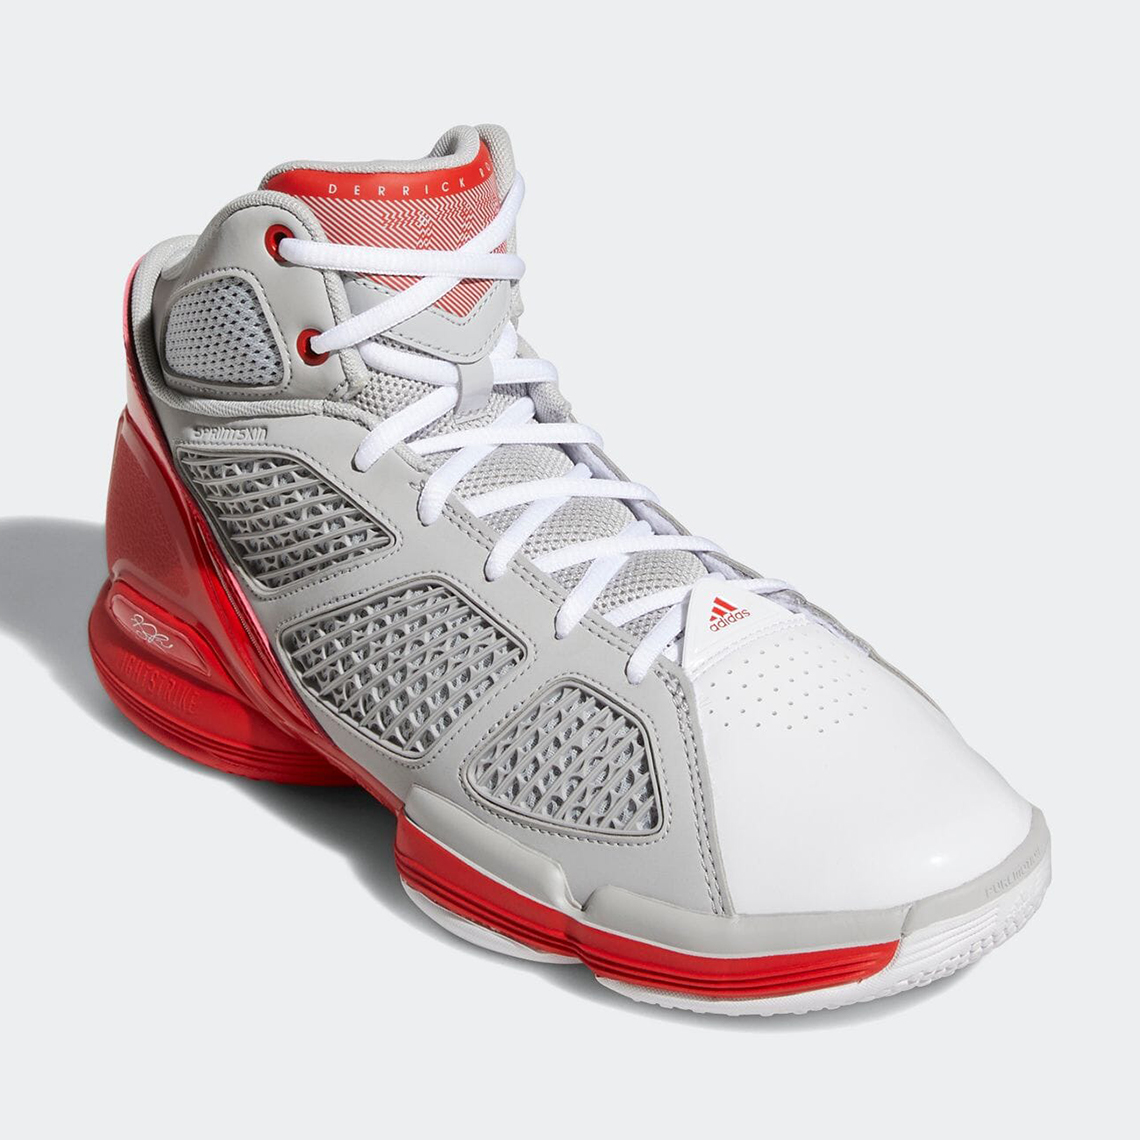 Adidas D Rose 1 5 White Grey Red Gy0257 1